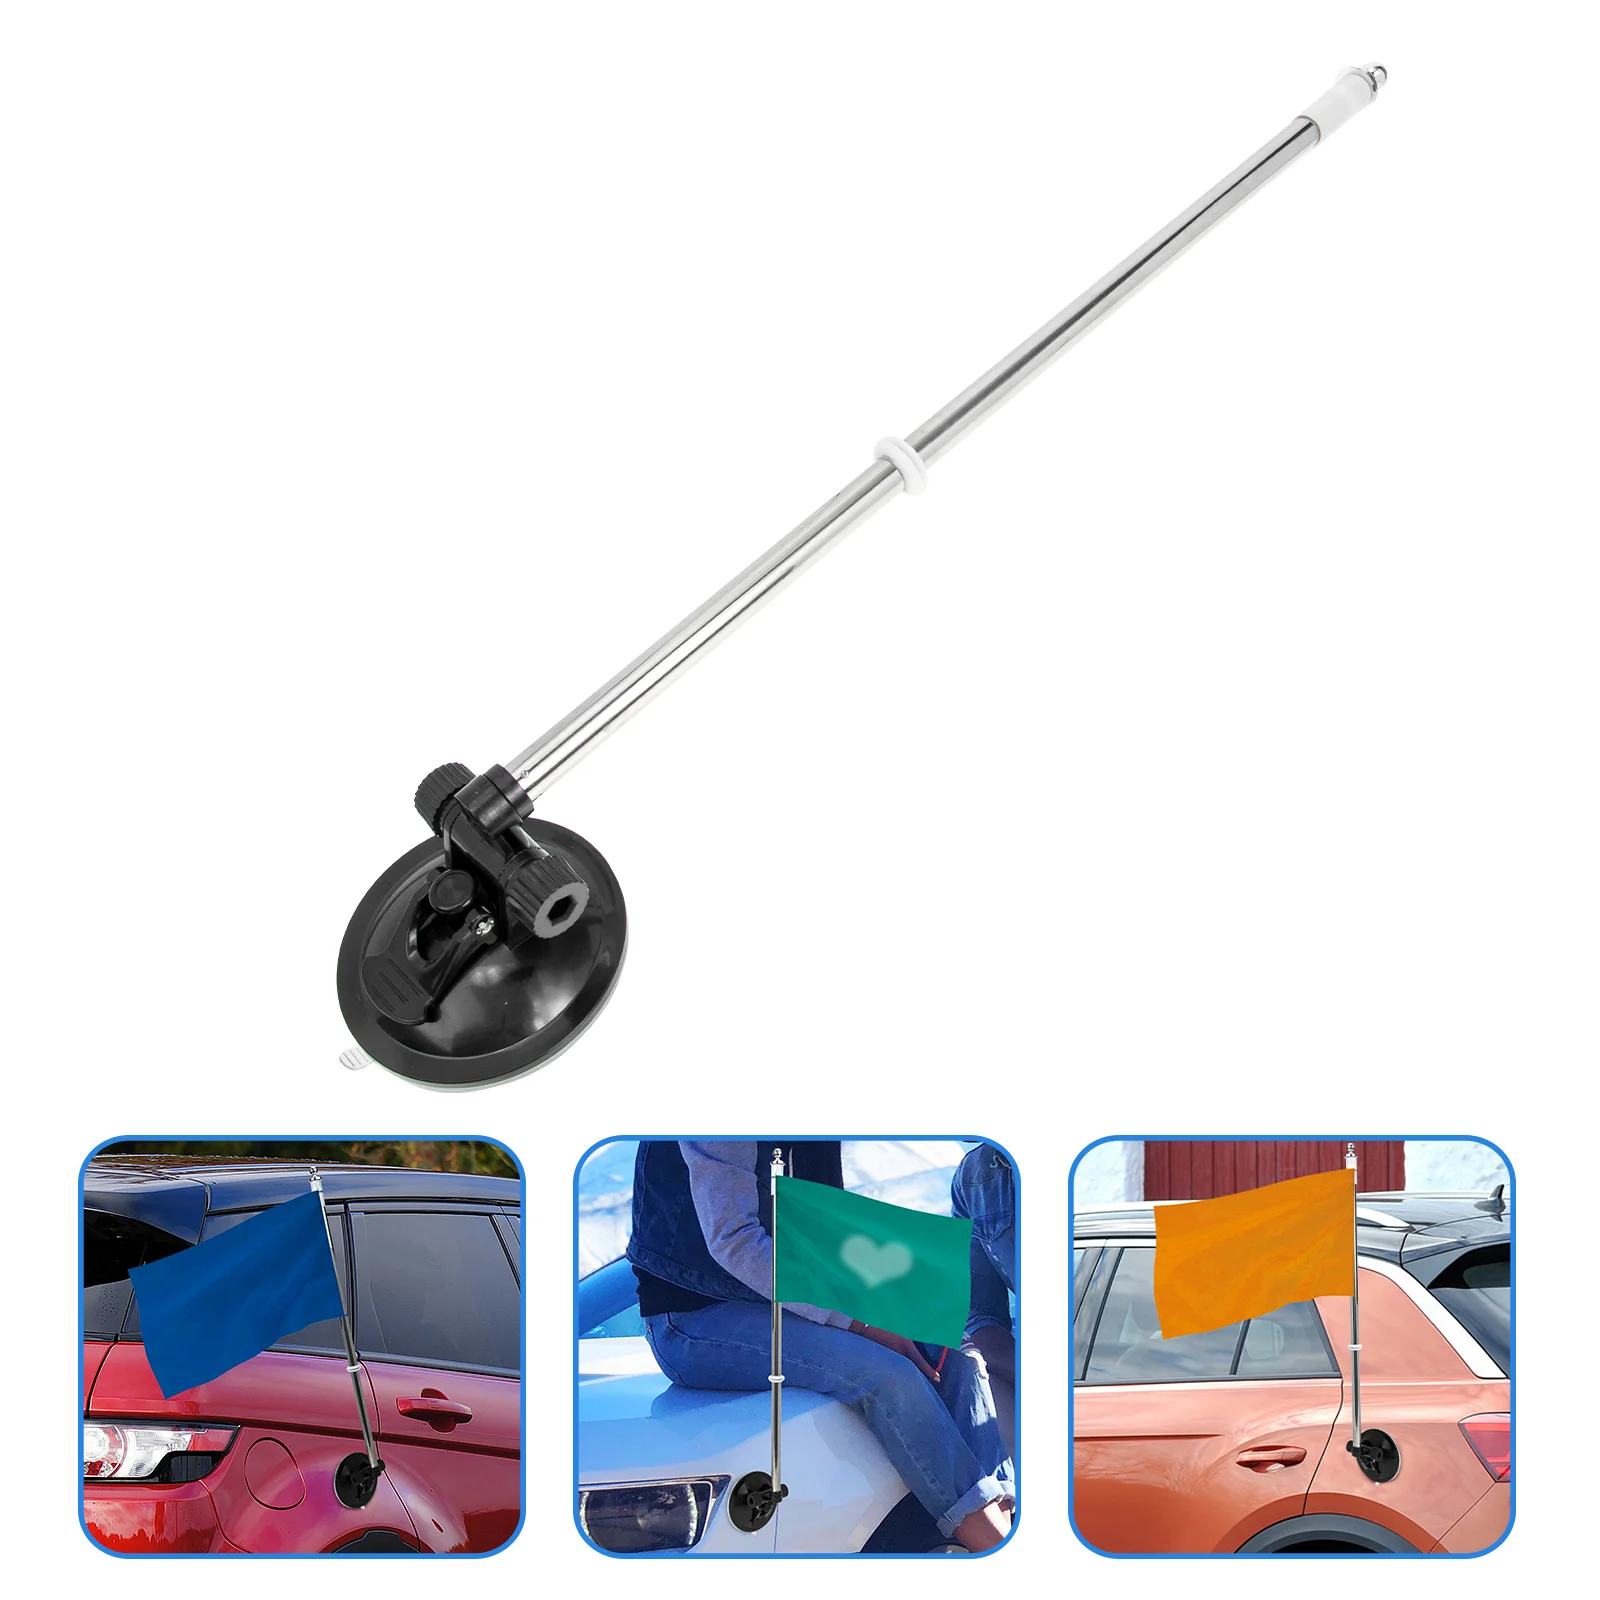 Flag Pole Car Holder Cup Suction Flagpole Mount Window Telescopic Support Bracket Universal Flagpoles Red Advertising Lagpole